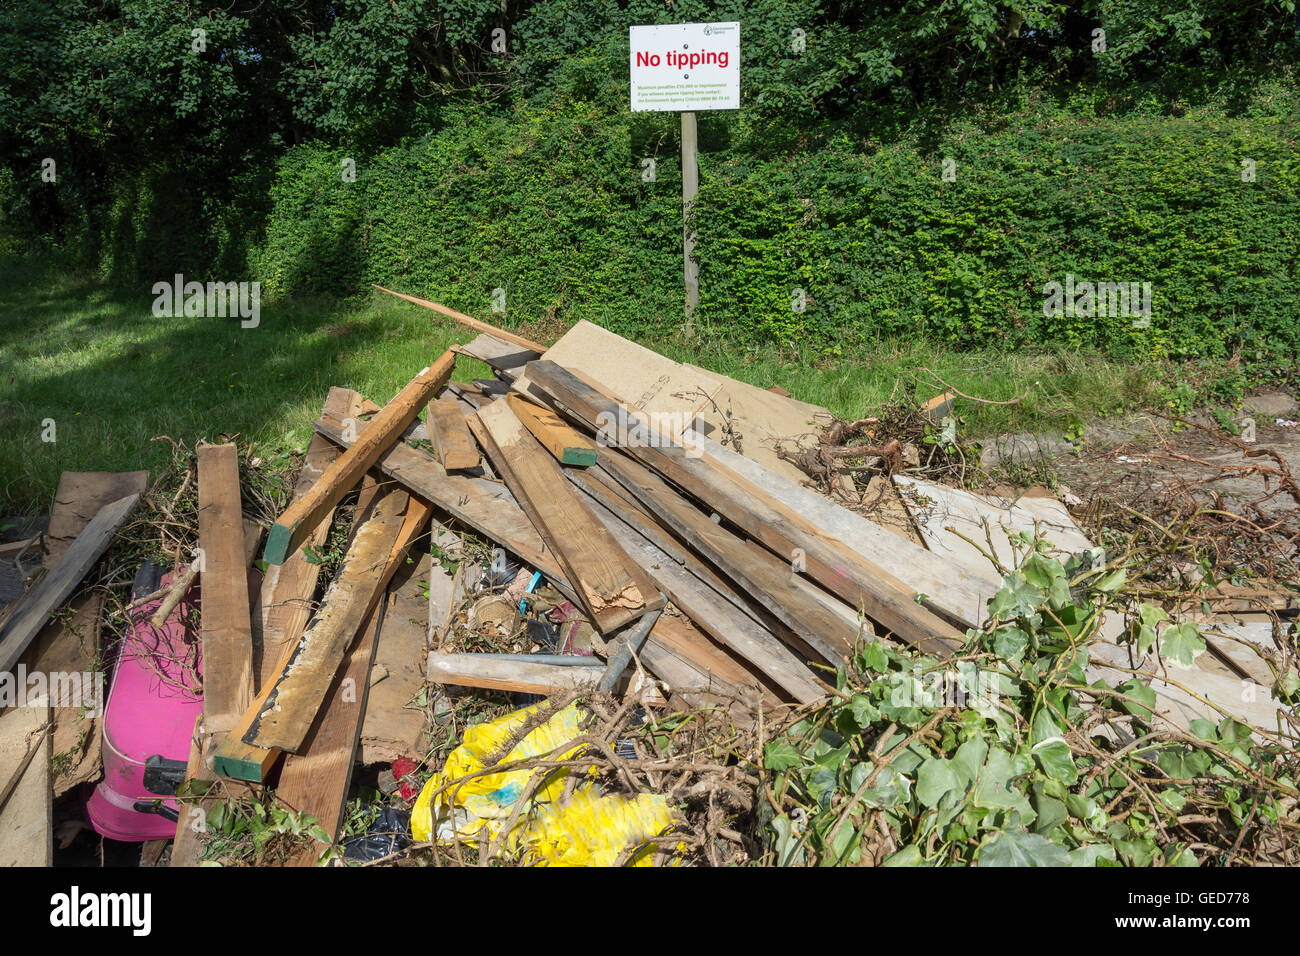 Pile of rubbish dumped at side of a road with No tipping sign, Stroude Road, Egham, Surrey, England, United Kingdom Stock Photo